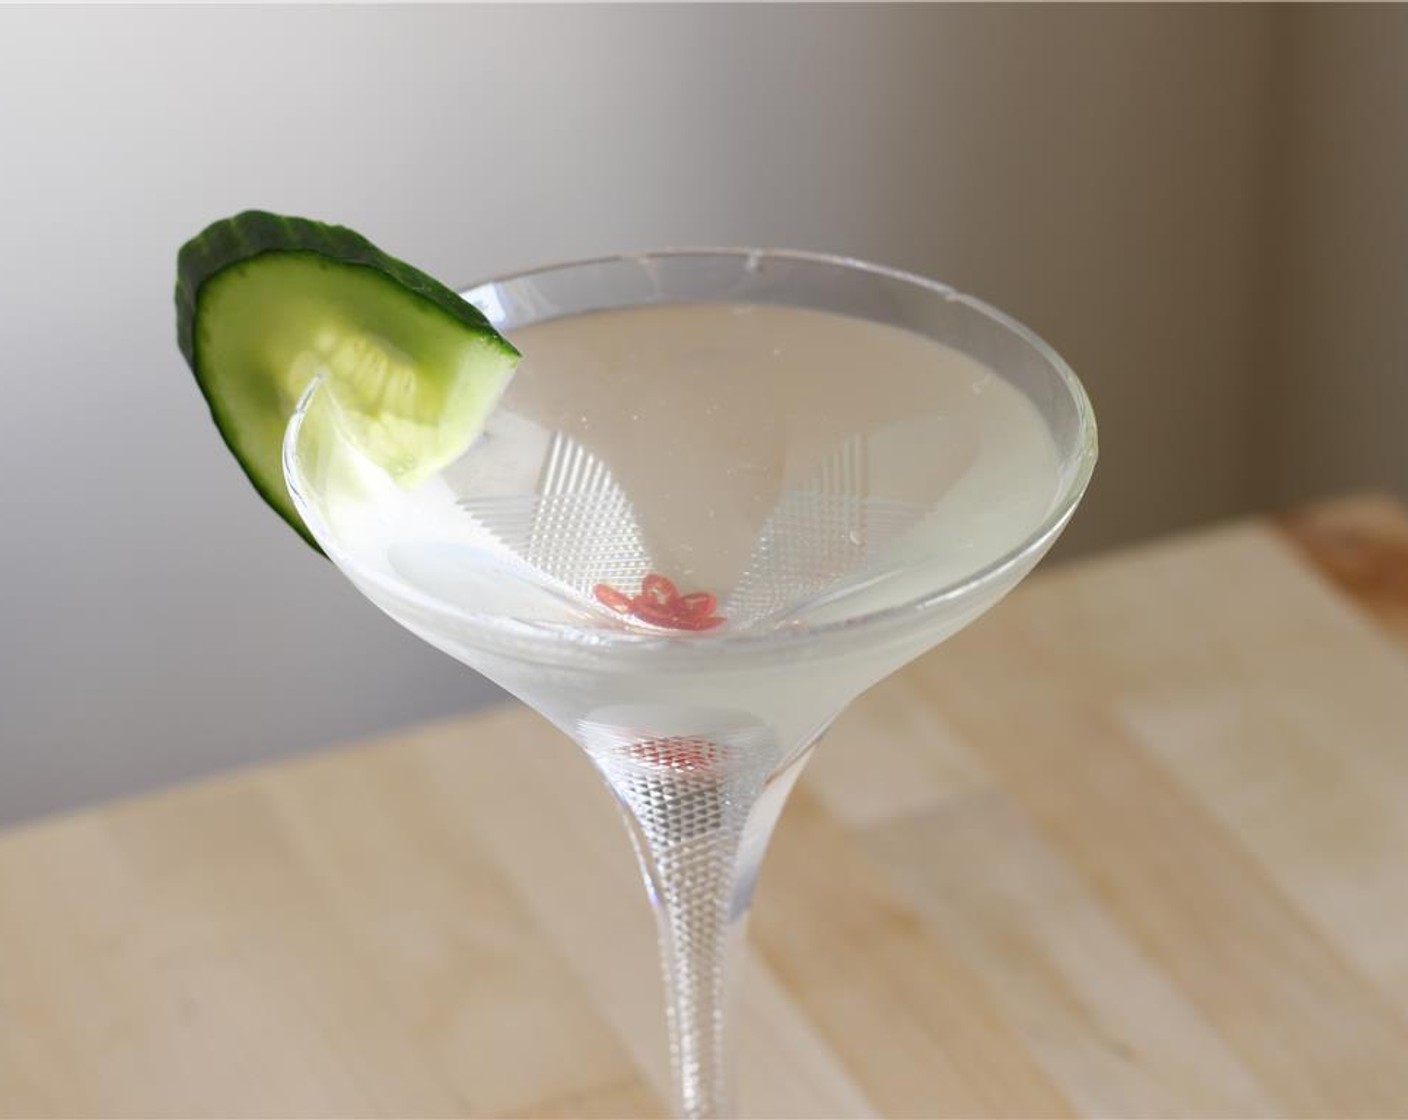 step 5 Strain cocktail into the martini glass, garnish with cucumber, and sip!